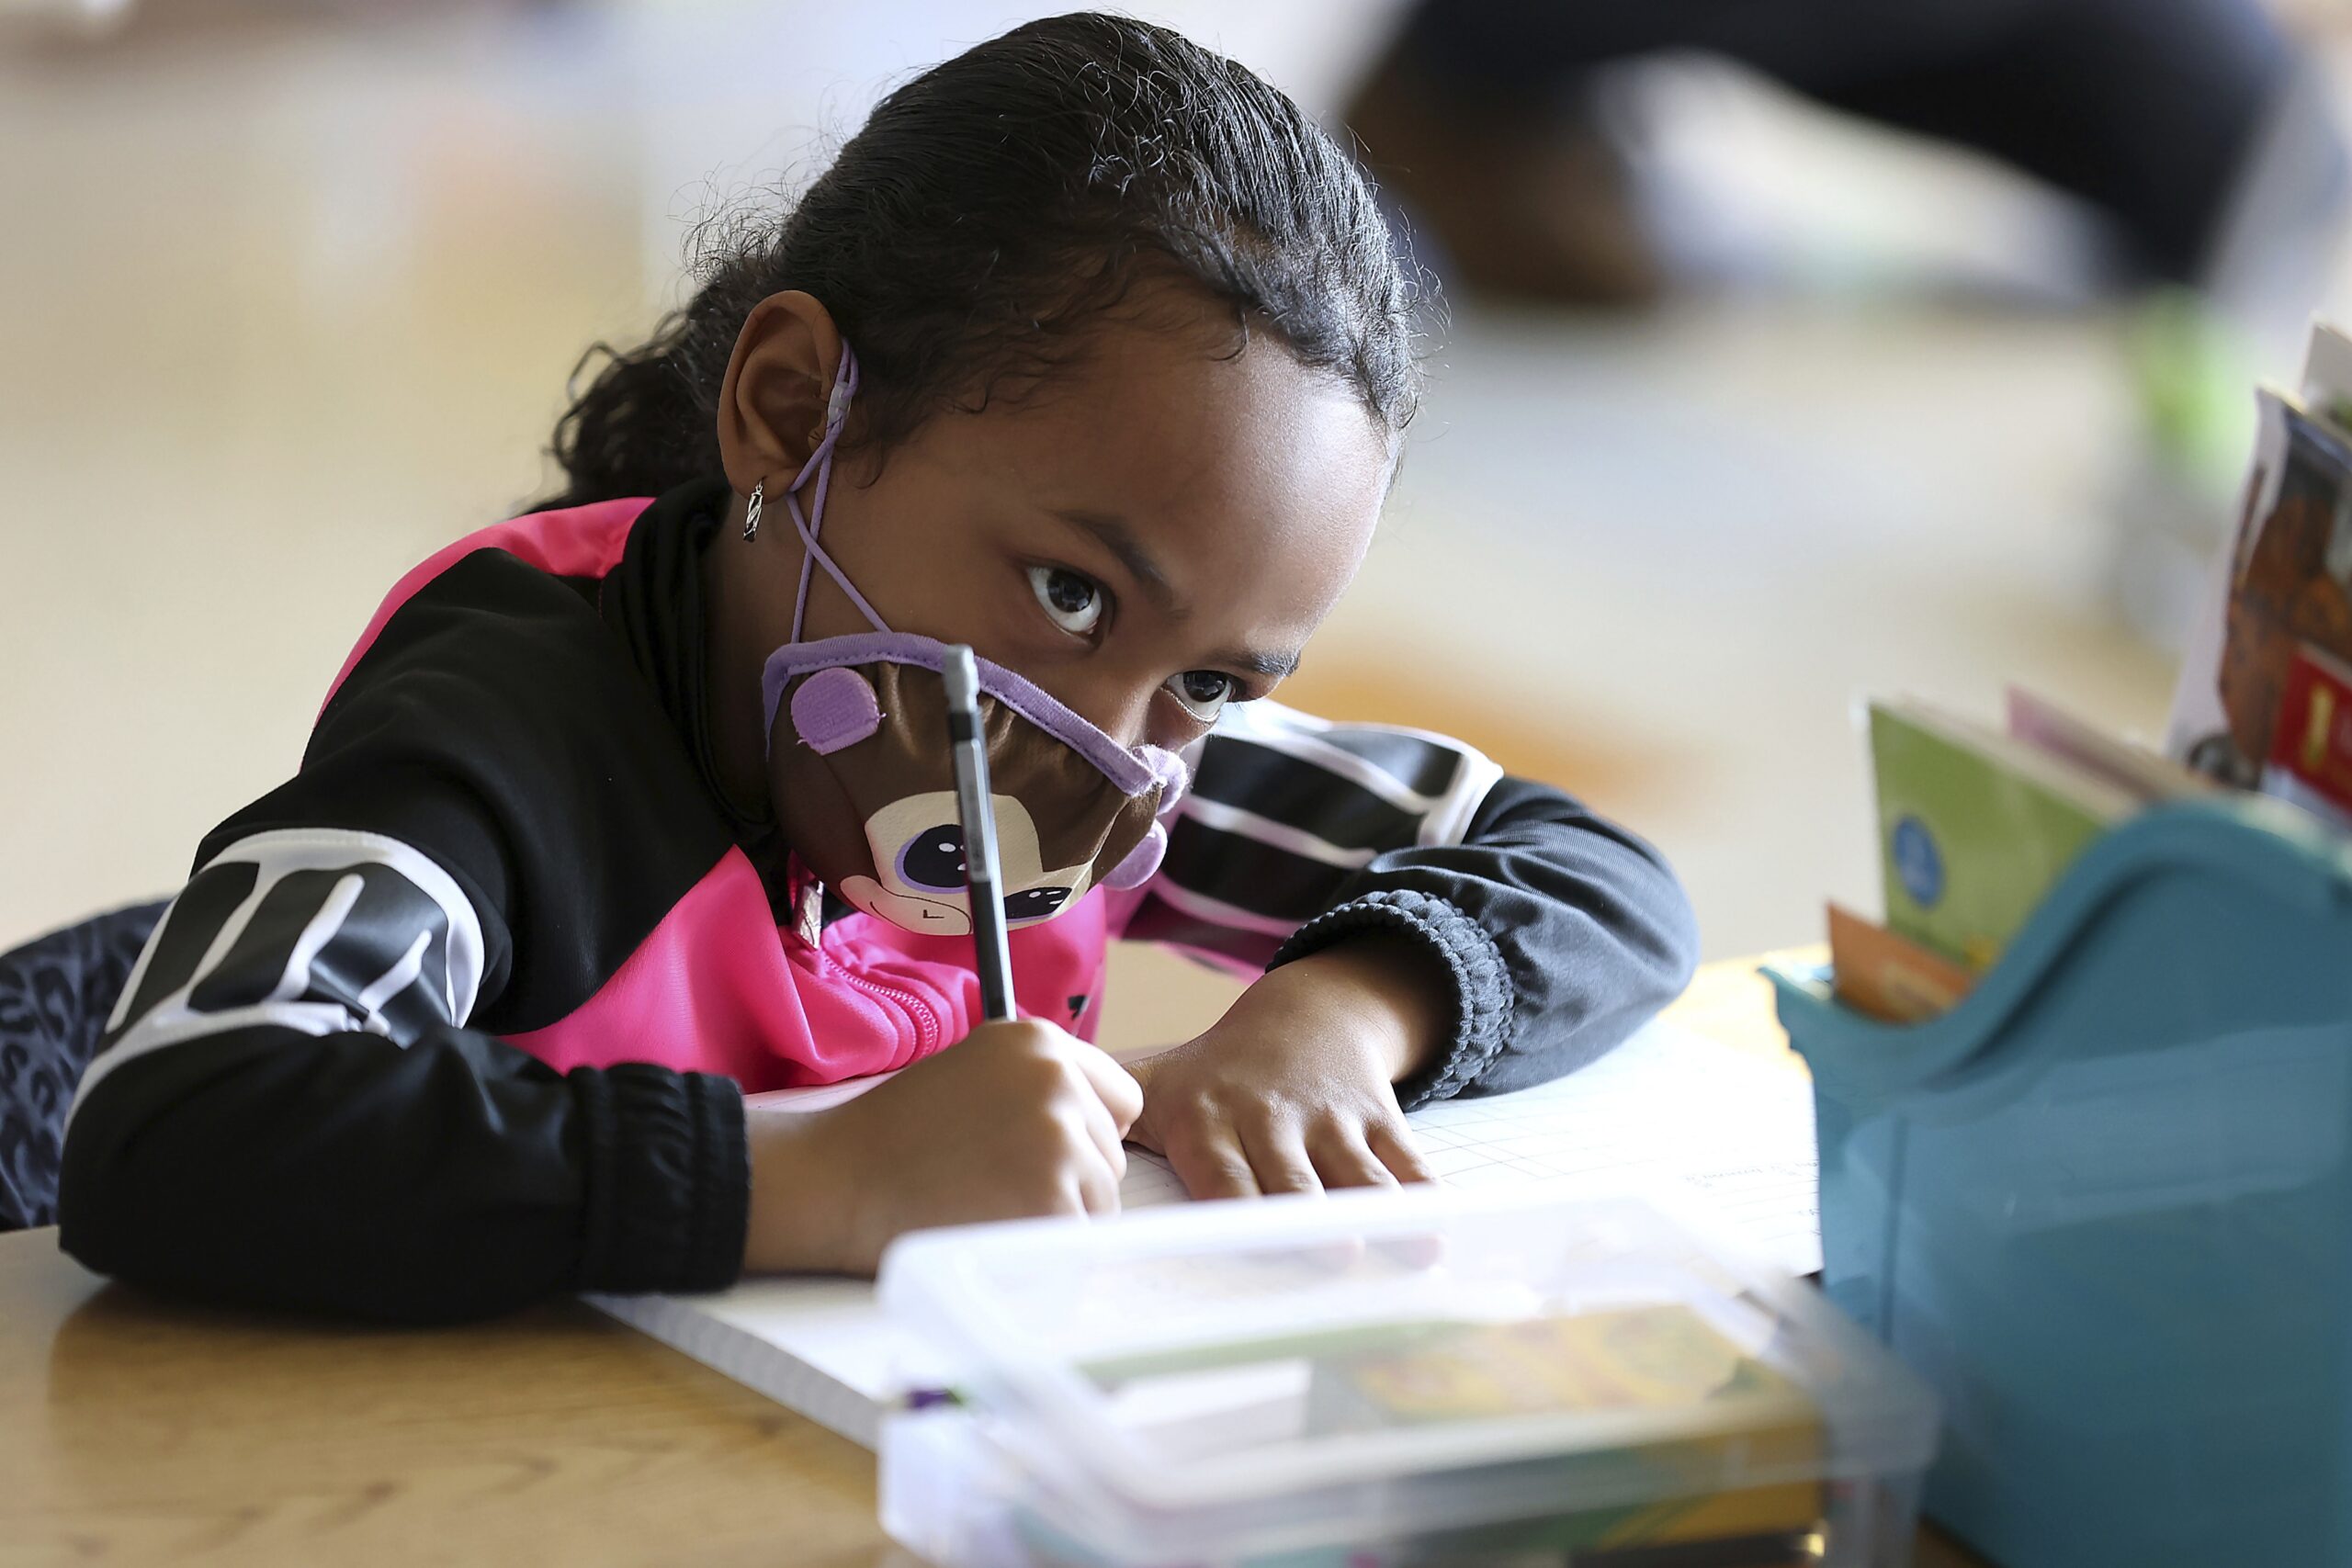 Cali Greenwood, a first-grader wearing a mask, looks up at her teacher